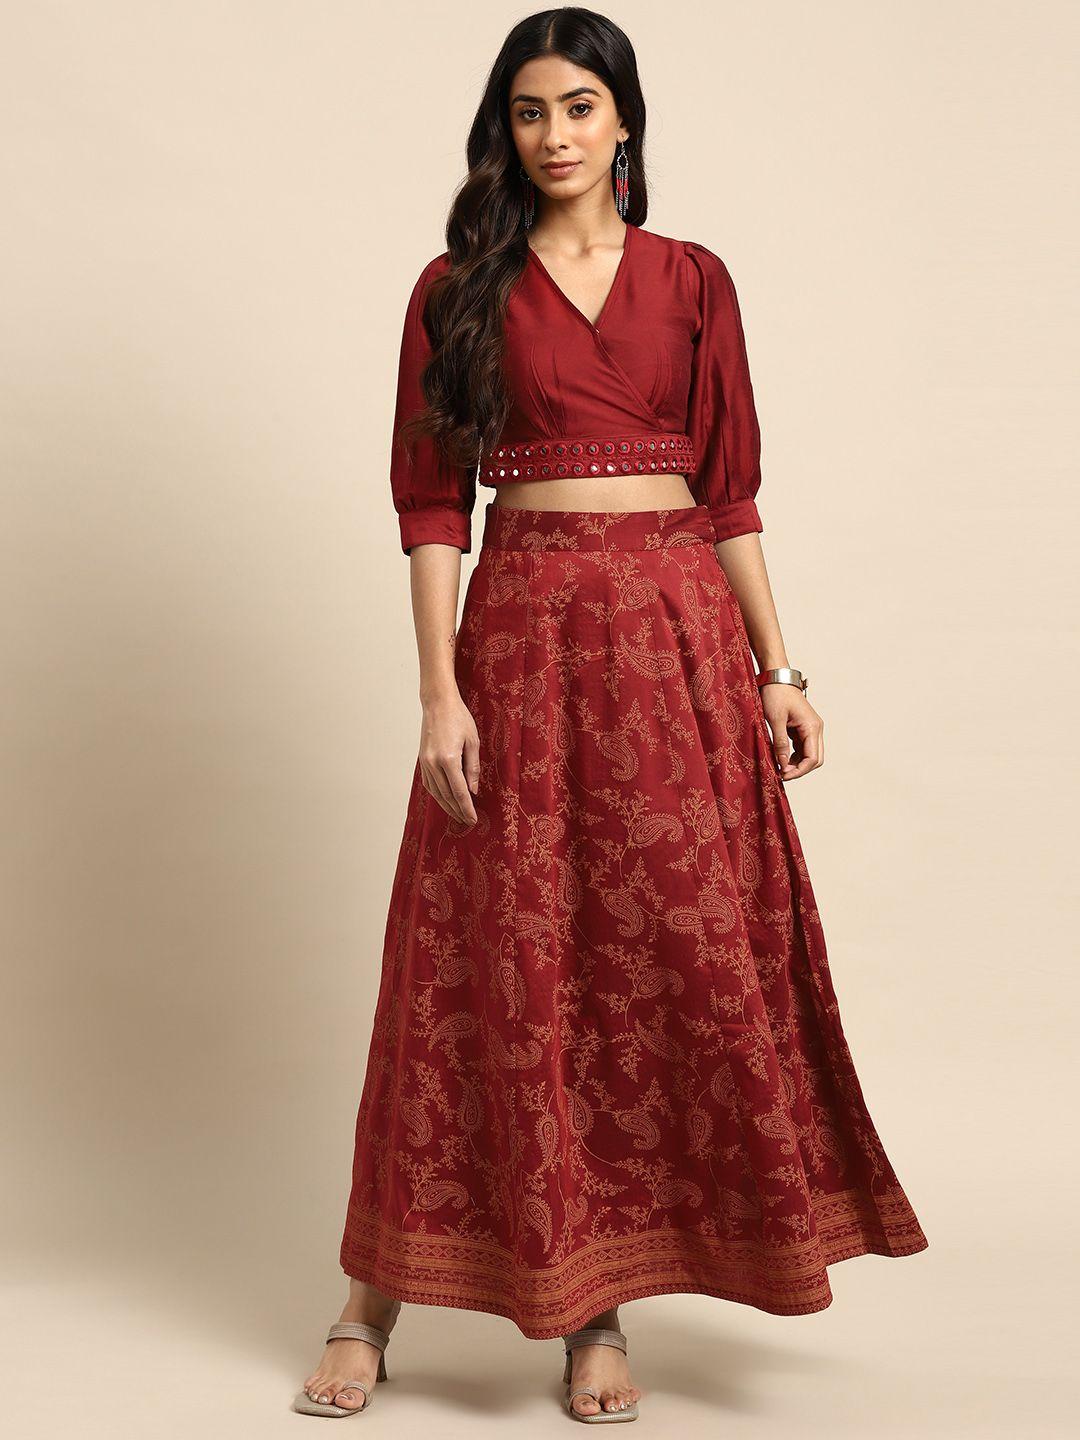 all about you mirror-work ready to wear fusion lehenga choli